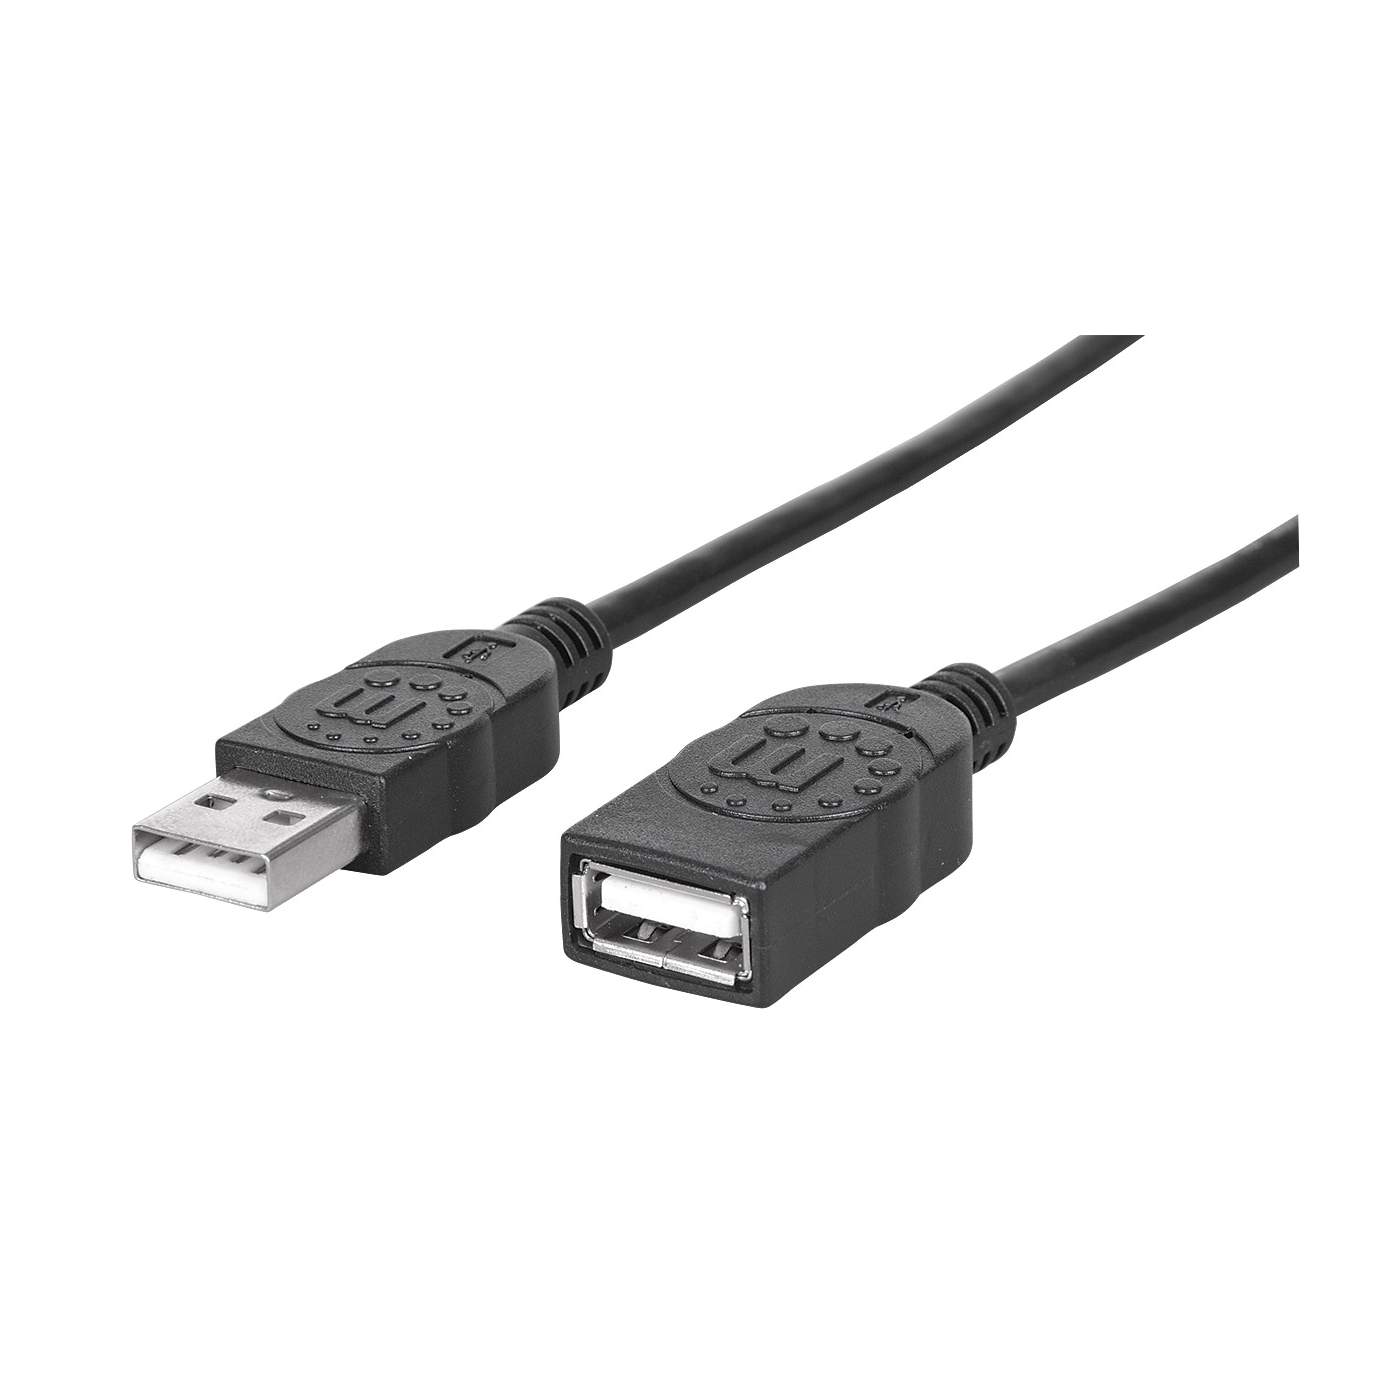 Hi-Speed USB 2.0 Extension Cable Image 1